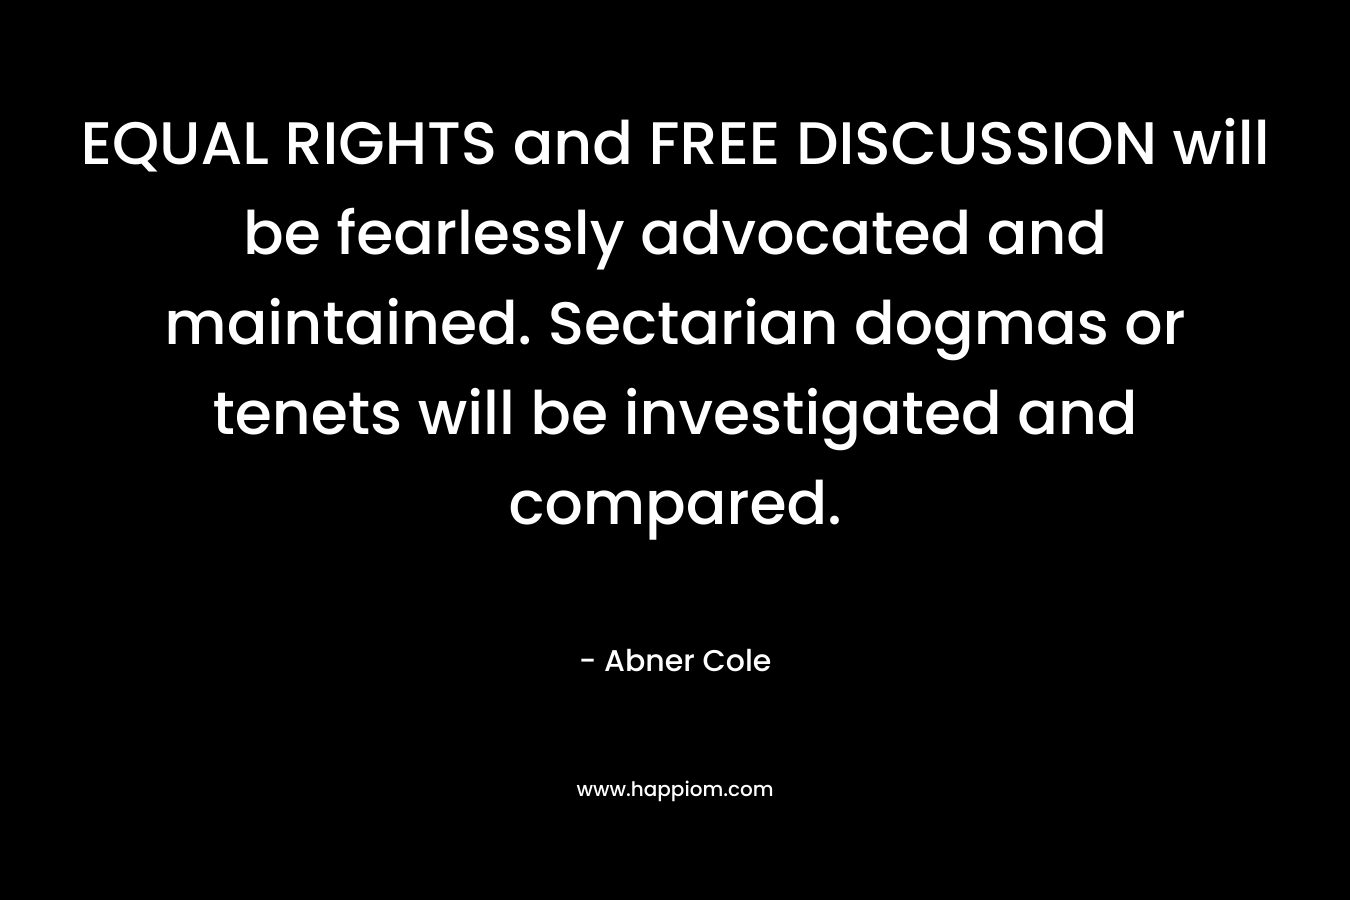 EQUAL RIGHTS and FREE DISCUSSION will be fearlessly advocated and maintained. Sectarian dogmas or tenets will be investigated and compared. – Abner Cole